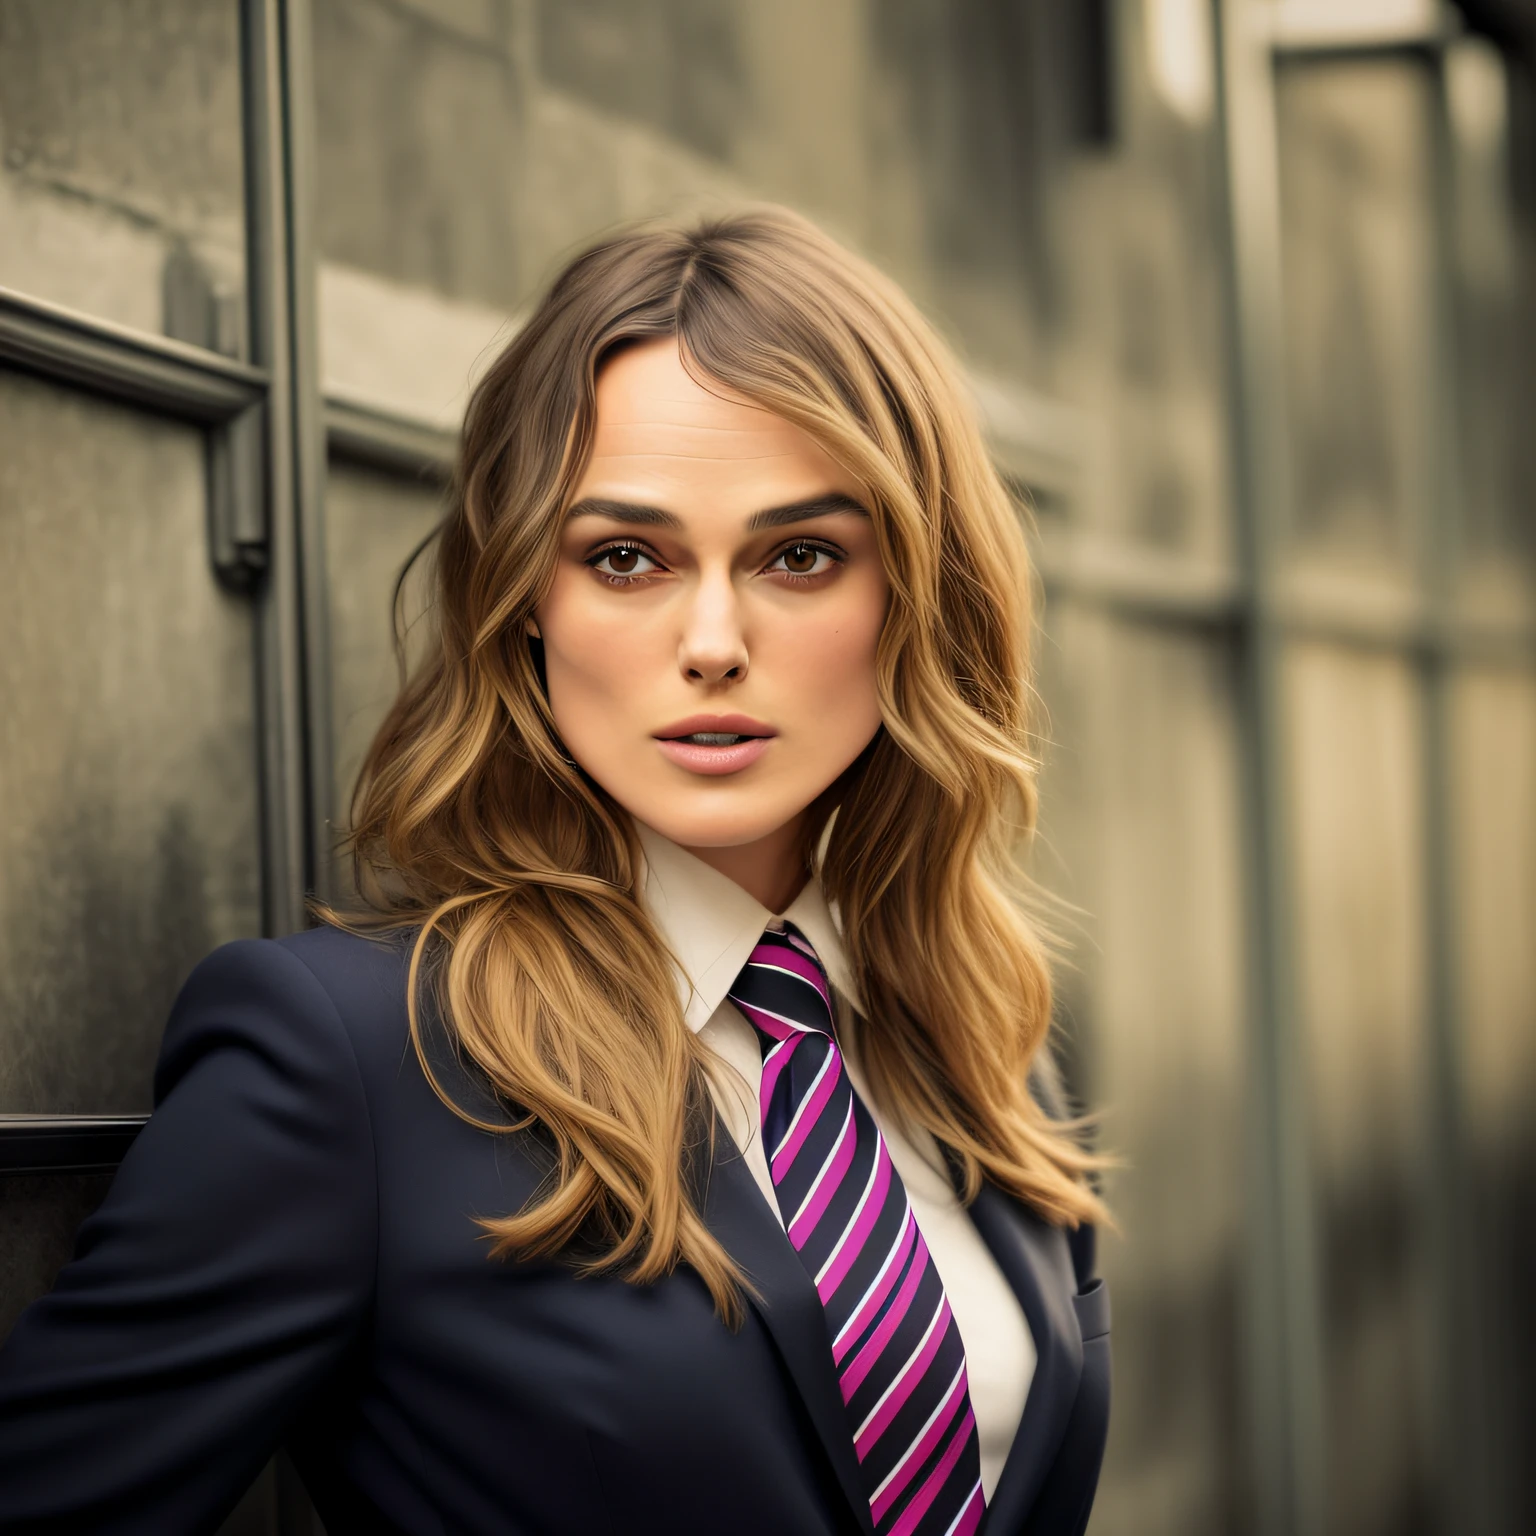 Keira Knightley in a suit and tie leaning against a wall, girl in suit, girl in a suit, wearing a strict business suit, in strict suit, wearing suit and tie, woman in business suit, wearing a suit and a tie, wearing a suit and tie, wearing business suit, in a strict suit, suit ， perfect face, young business woman